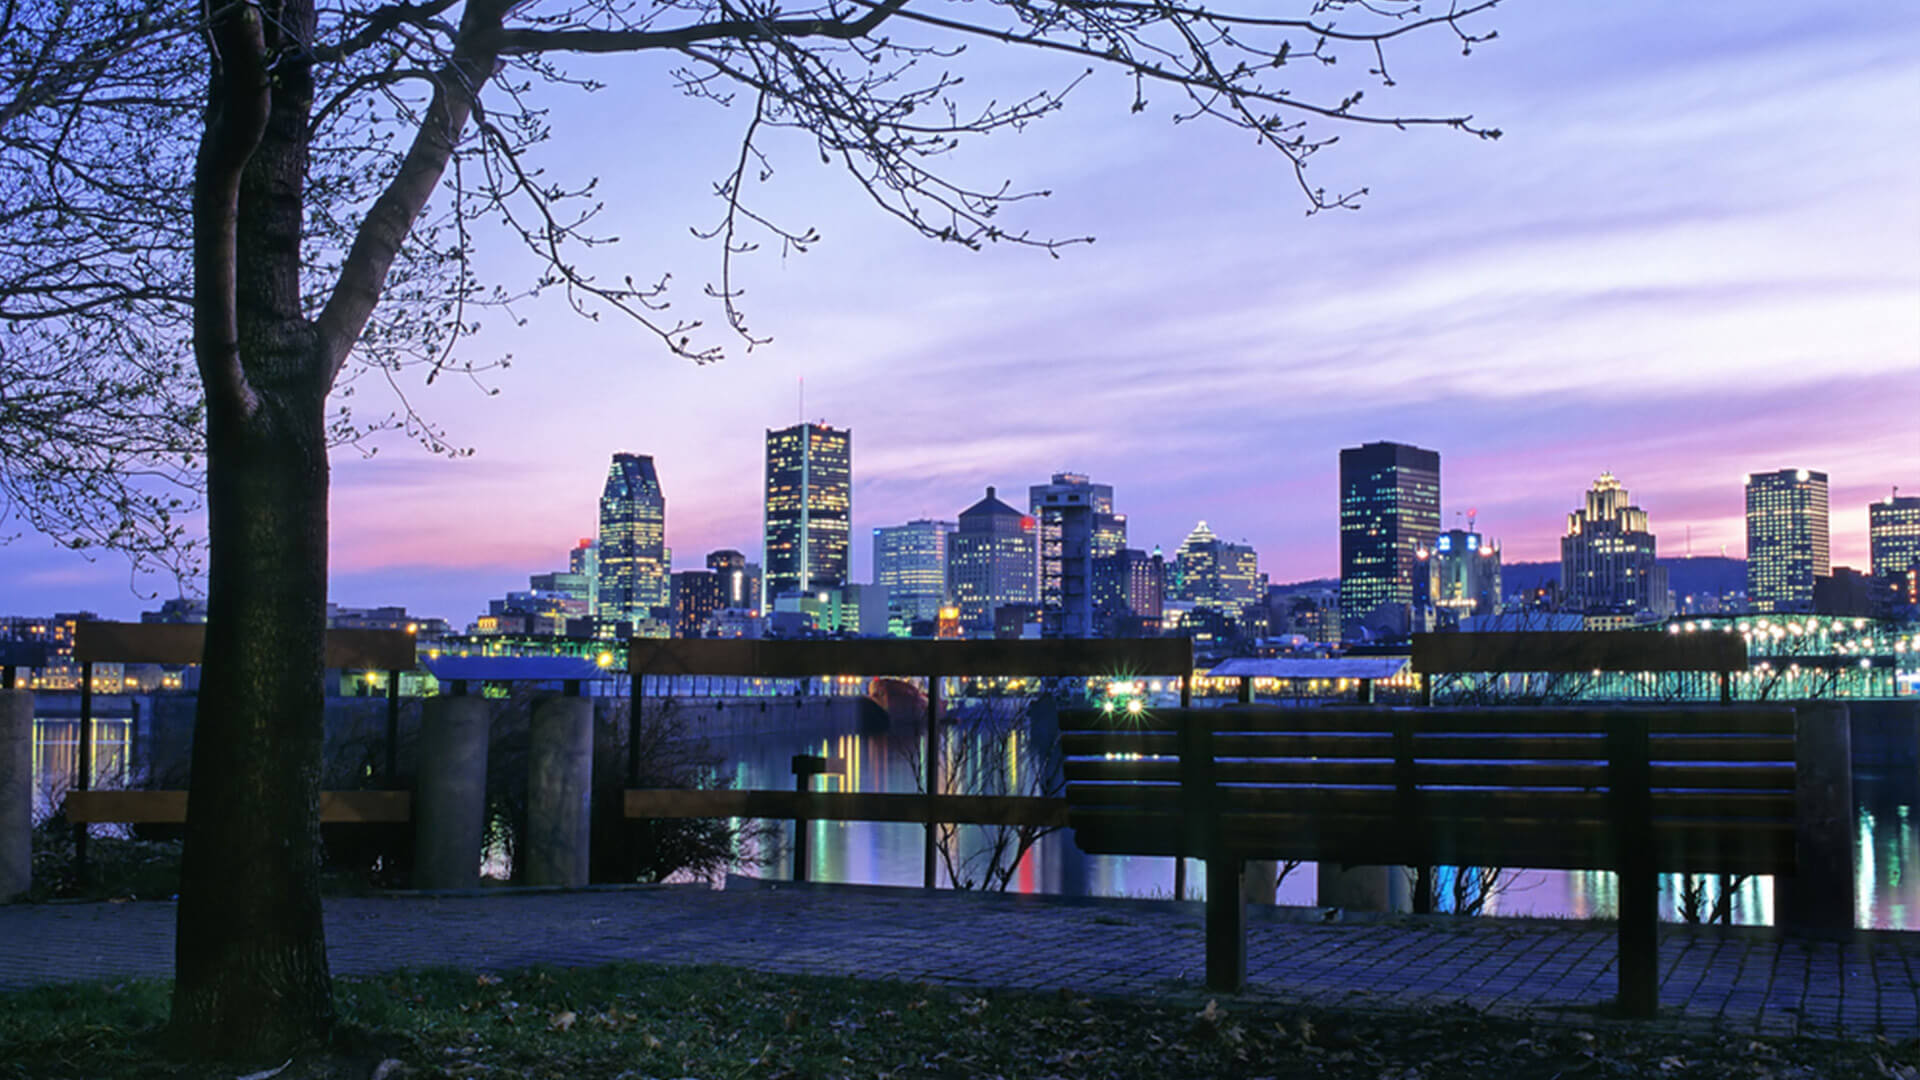 A serene twilight view from a park bench, overlooking a river with a vibrant city skyline backdrop under a gradient evening sky.